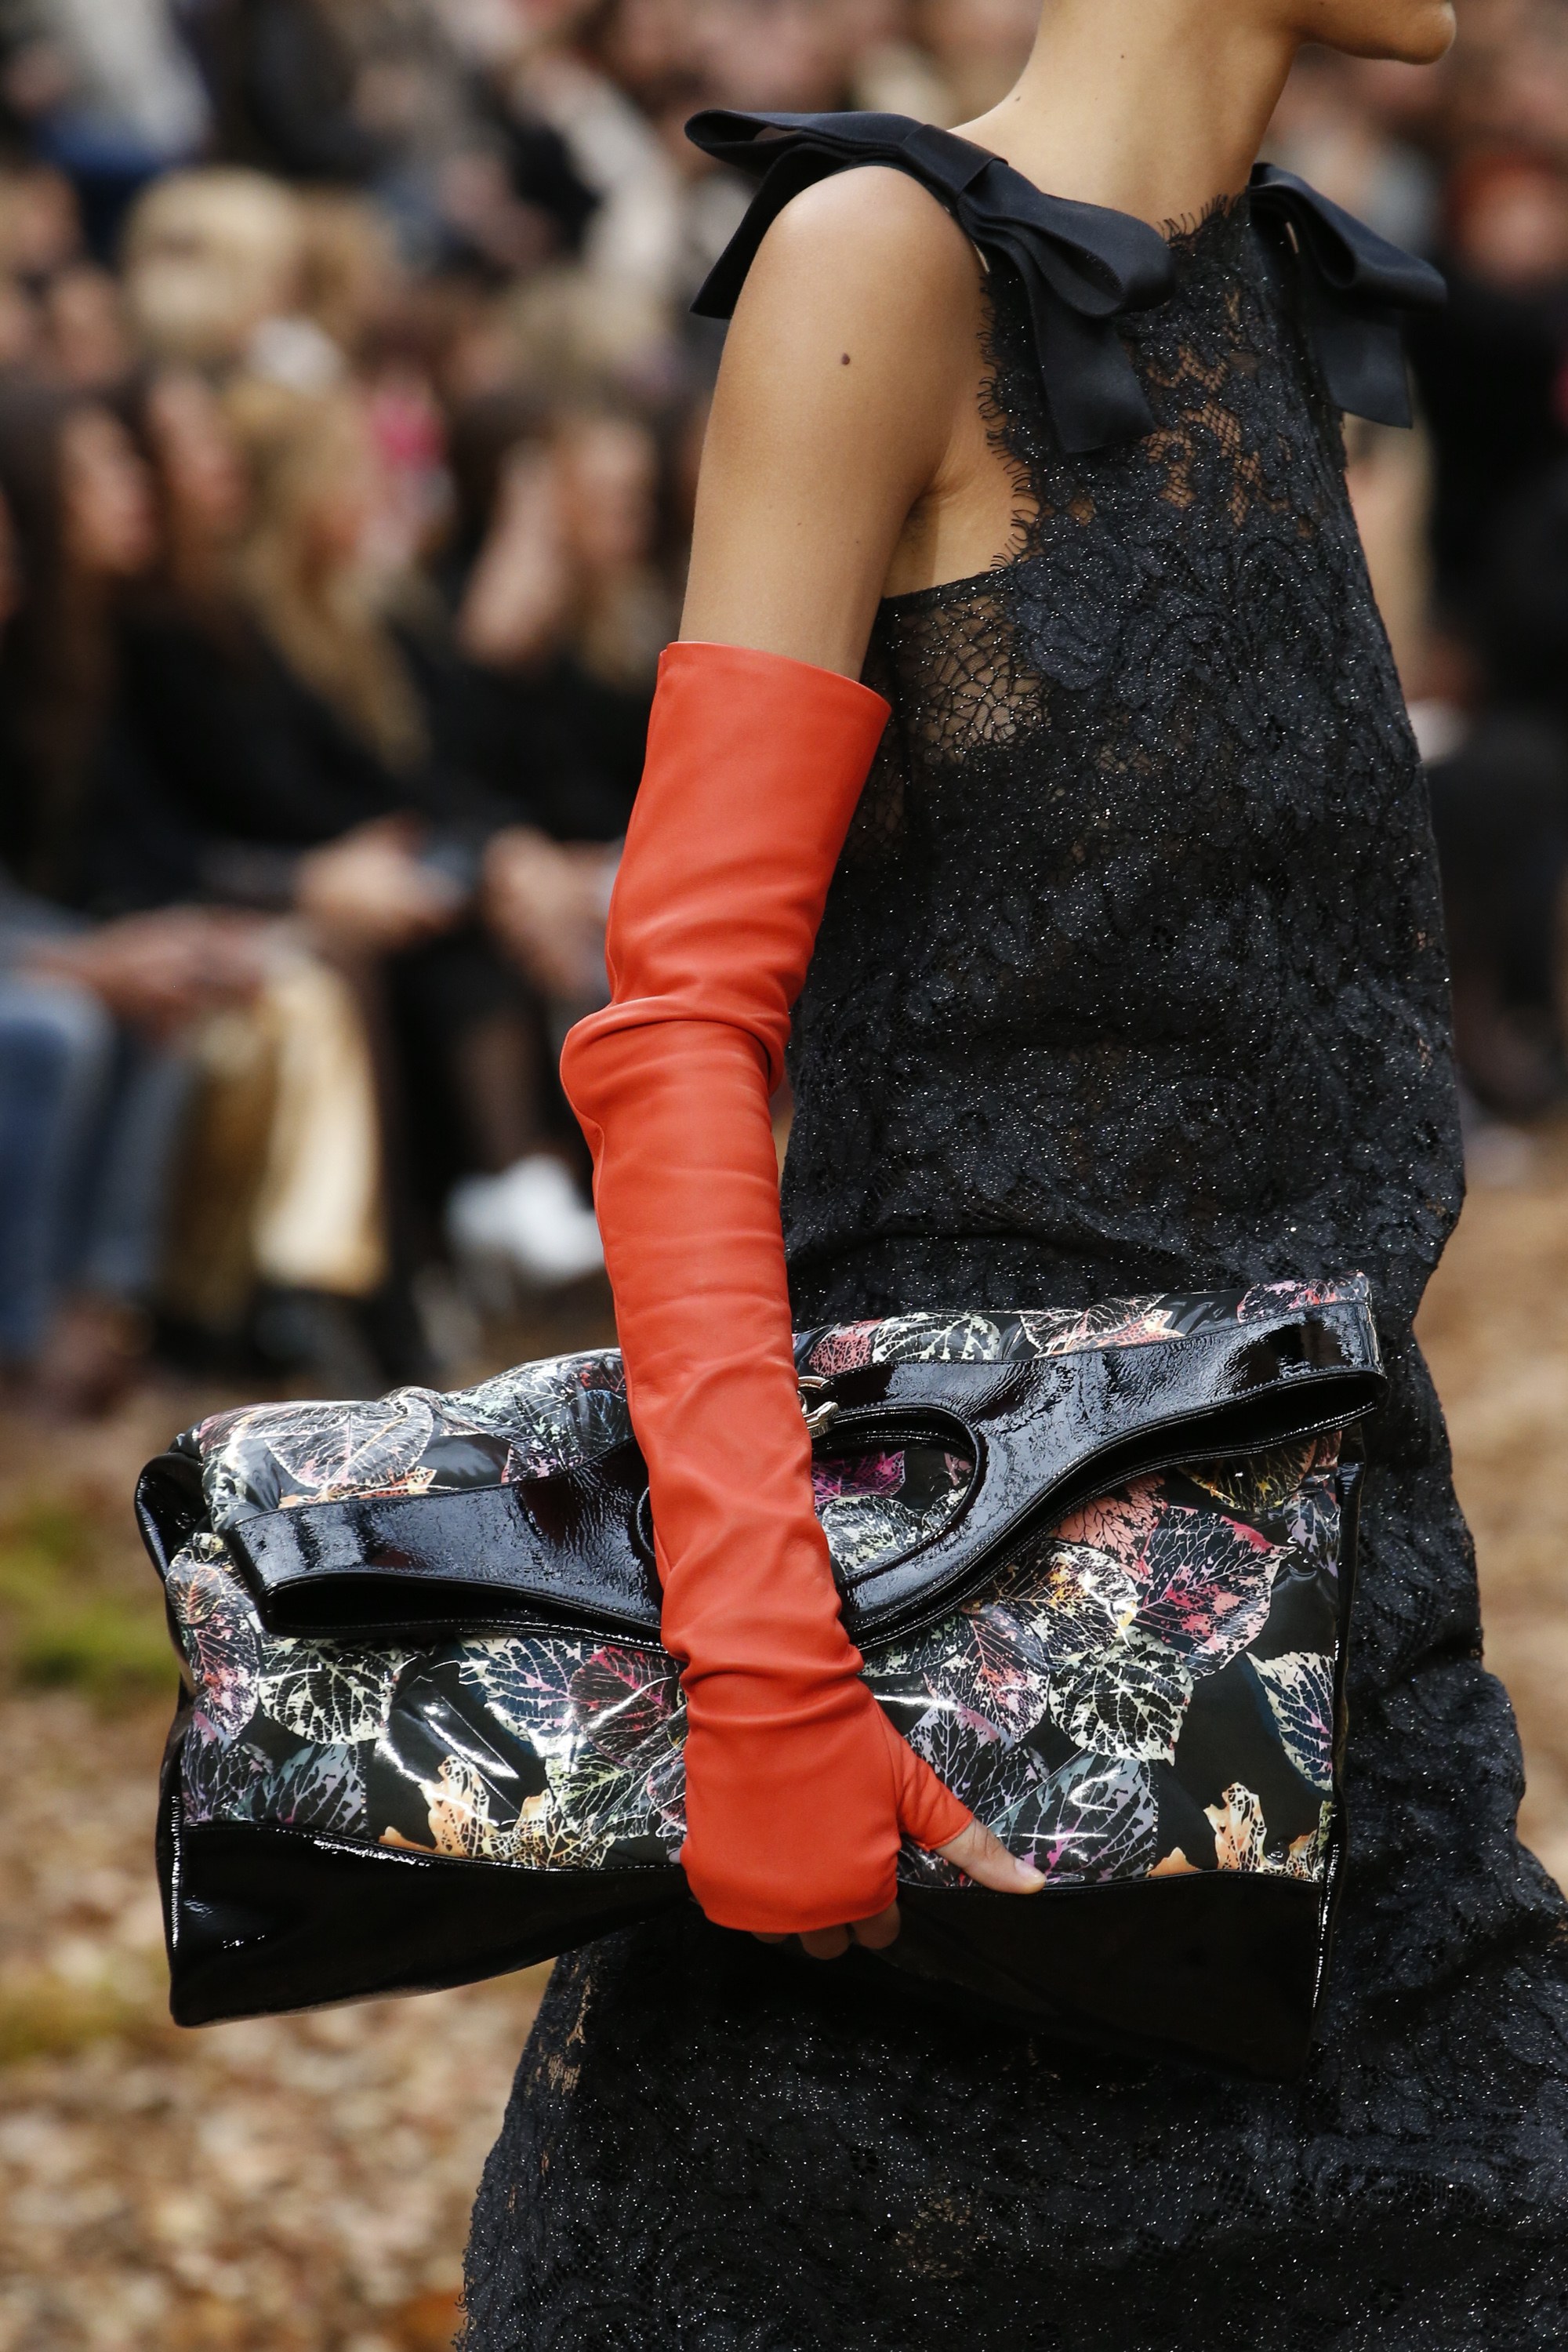 Chanel Fall/Winter 2018 Runway Bag Collection - Spotted Fashion